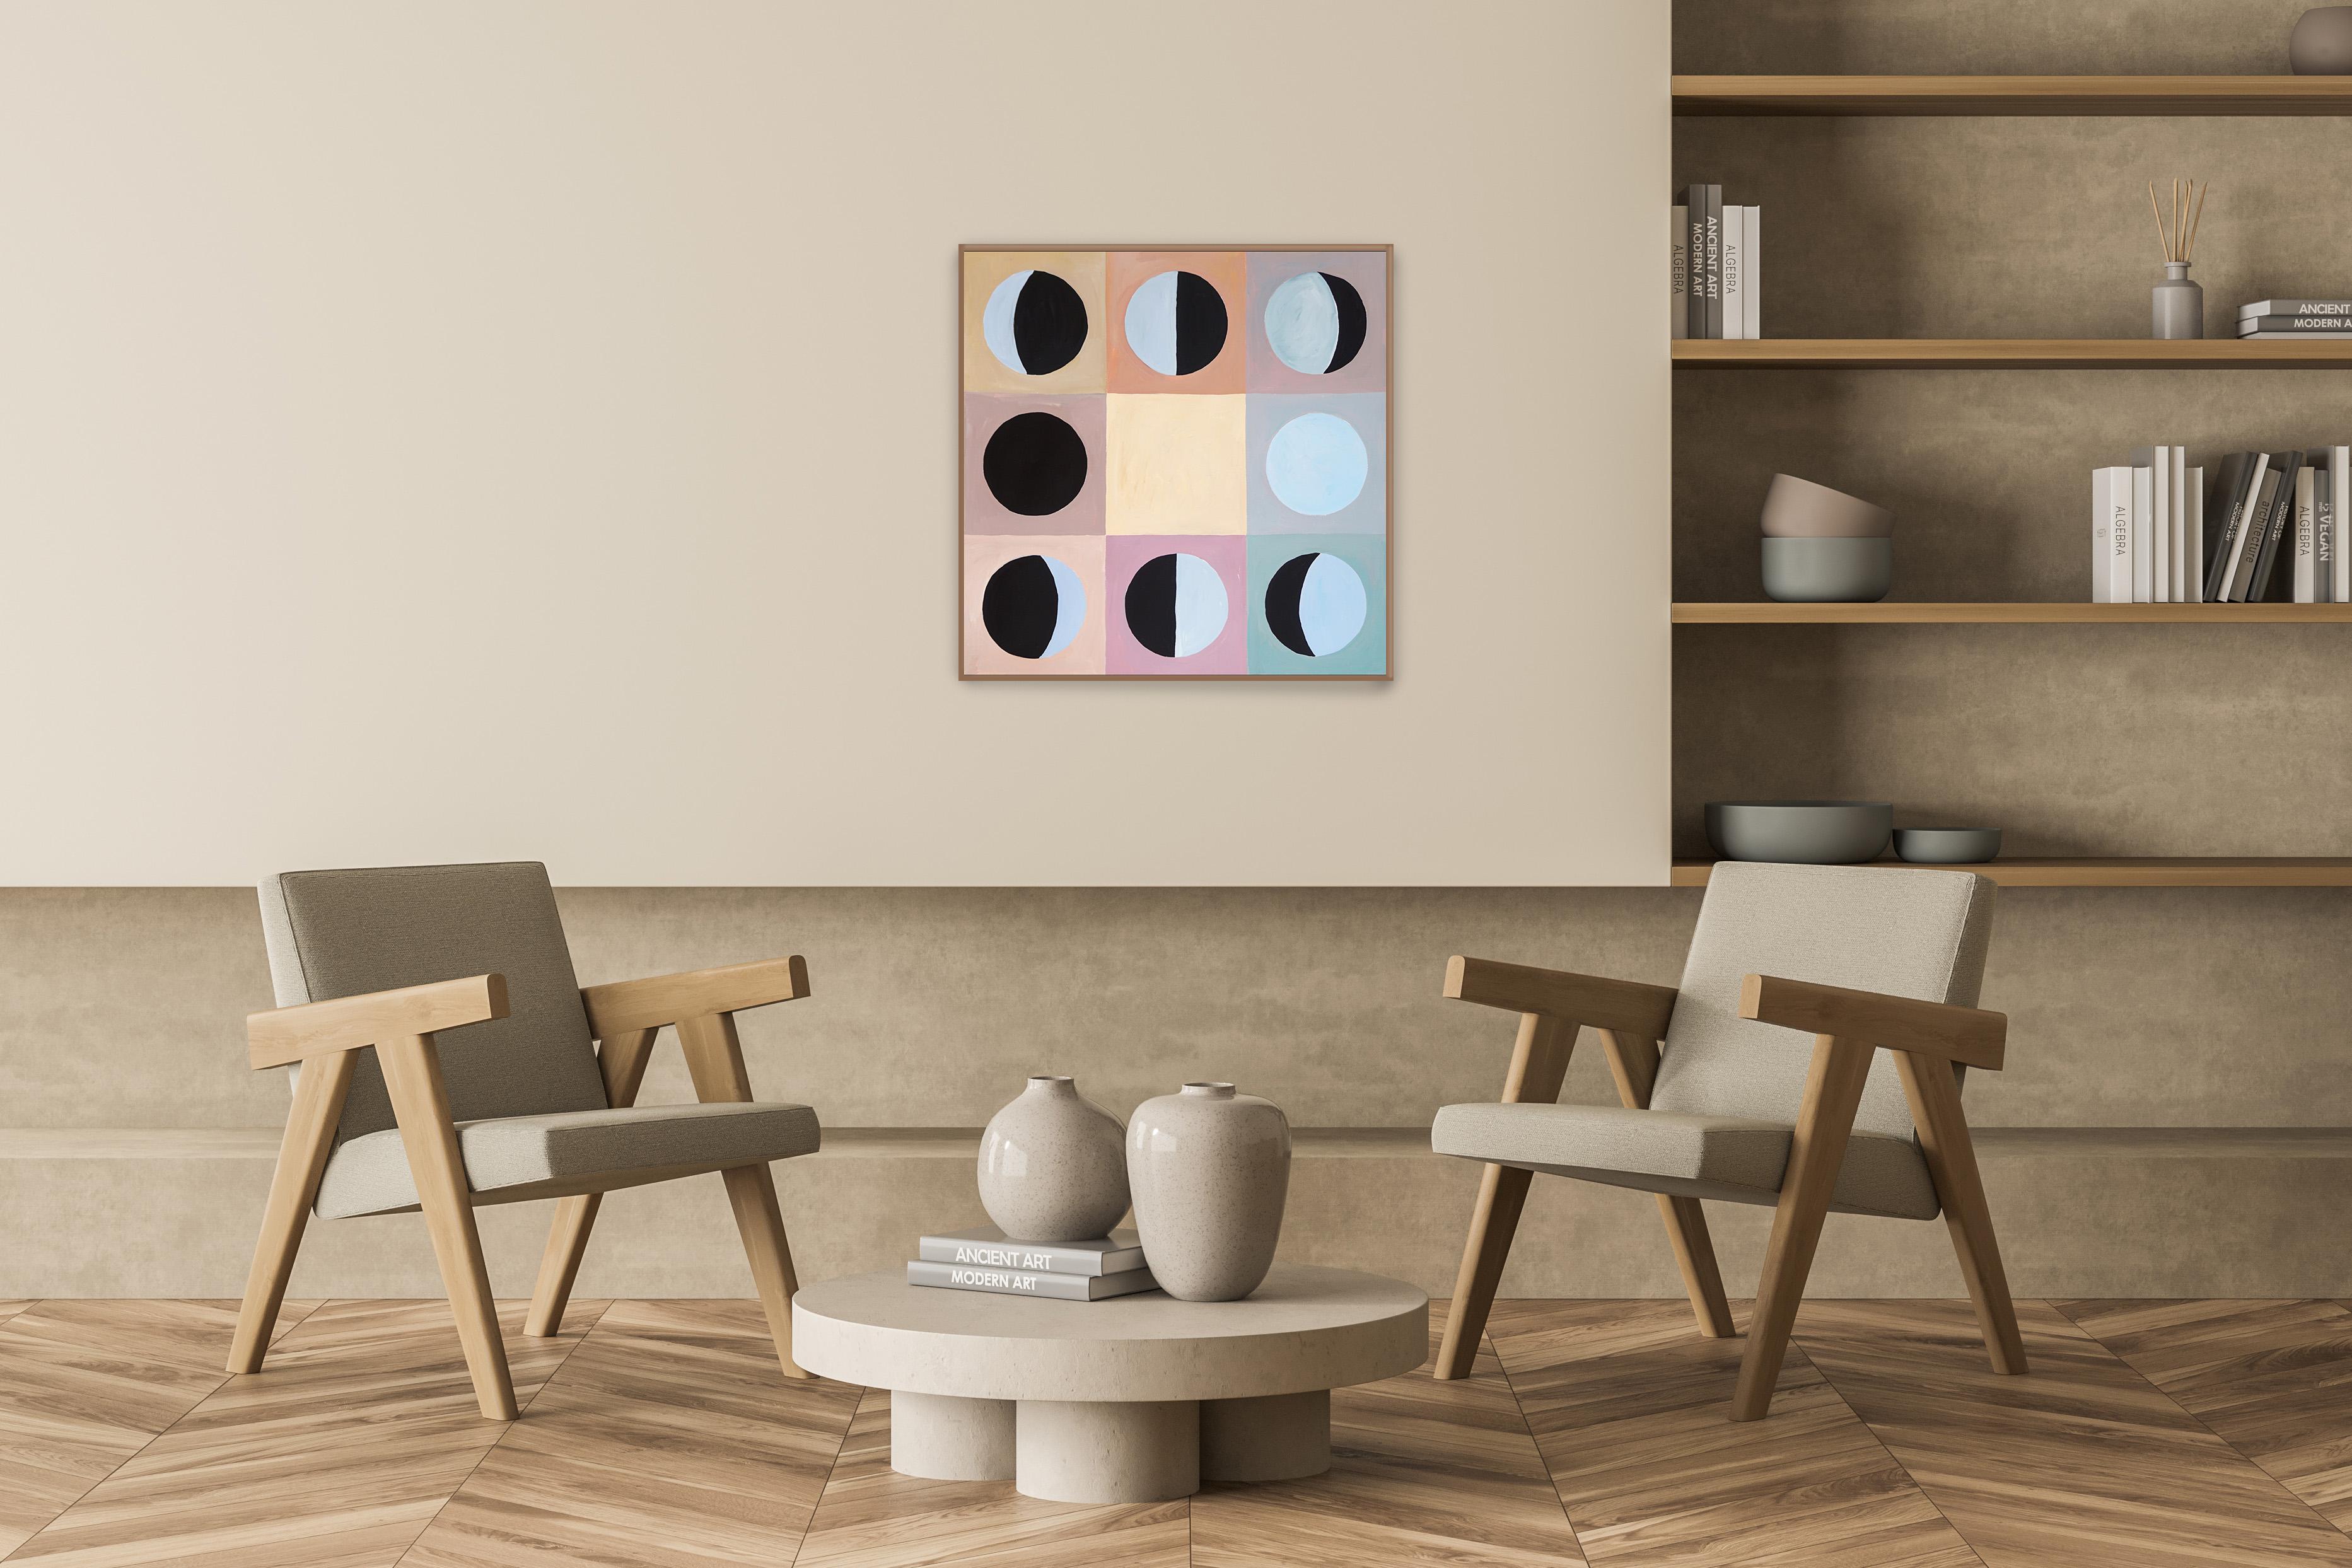 These series of paintings by Natalia Roman gather their inspiration from geometric, minimalist shapes and paintings from the beginning of Modernism, with a special emphasis on Art Deco shapes of the 30's, 40's and 50's. The subtle but chic color